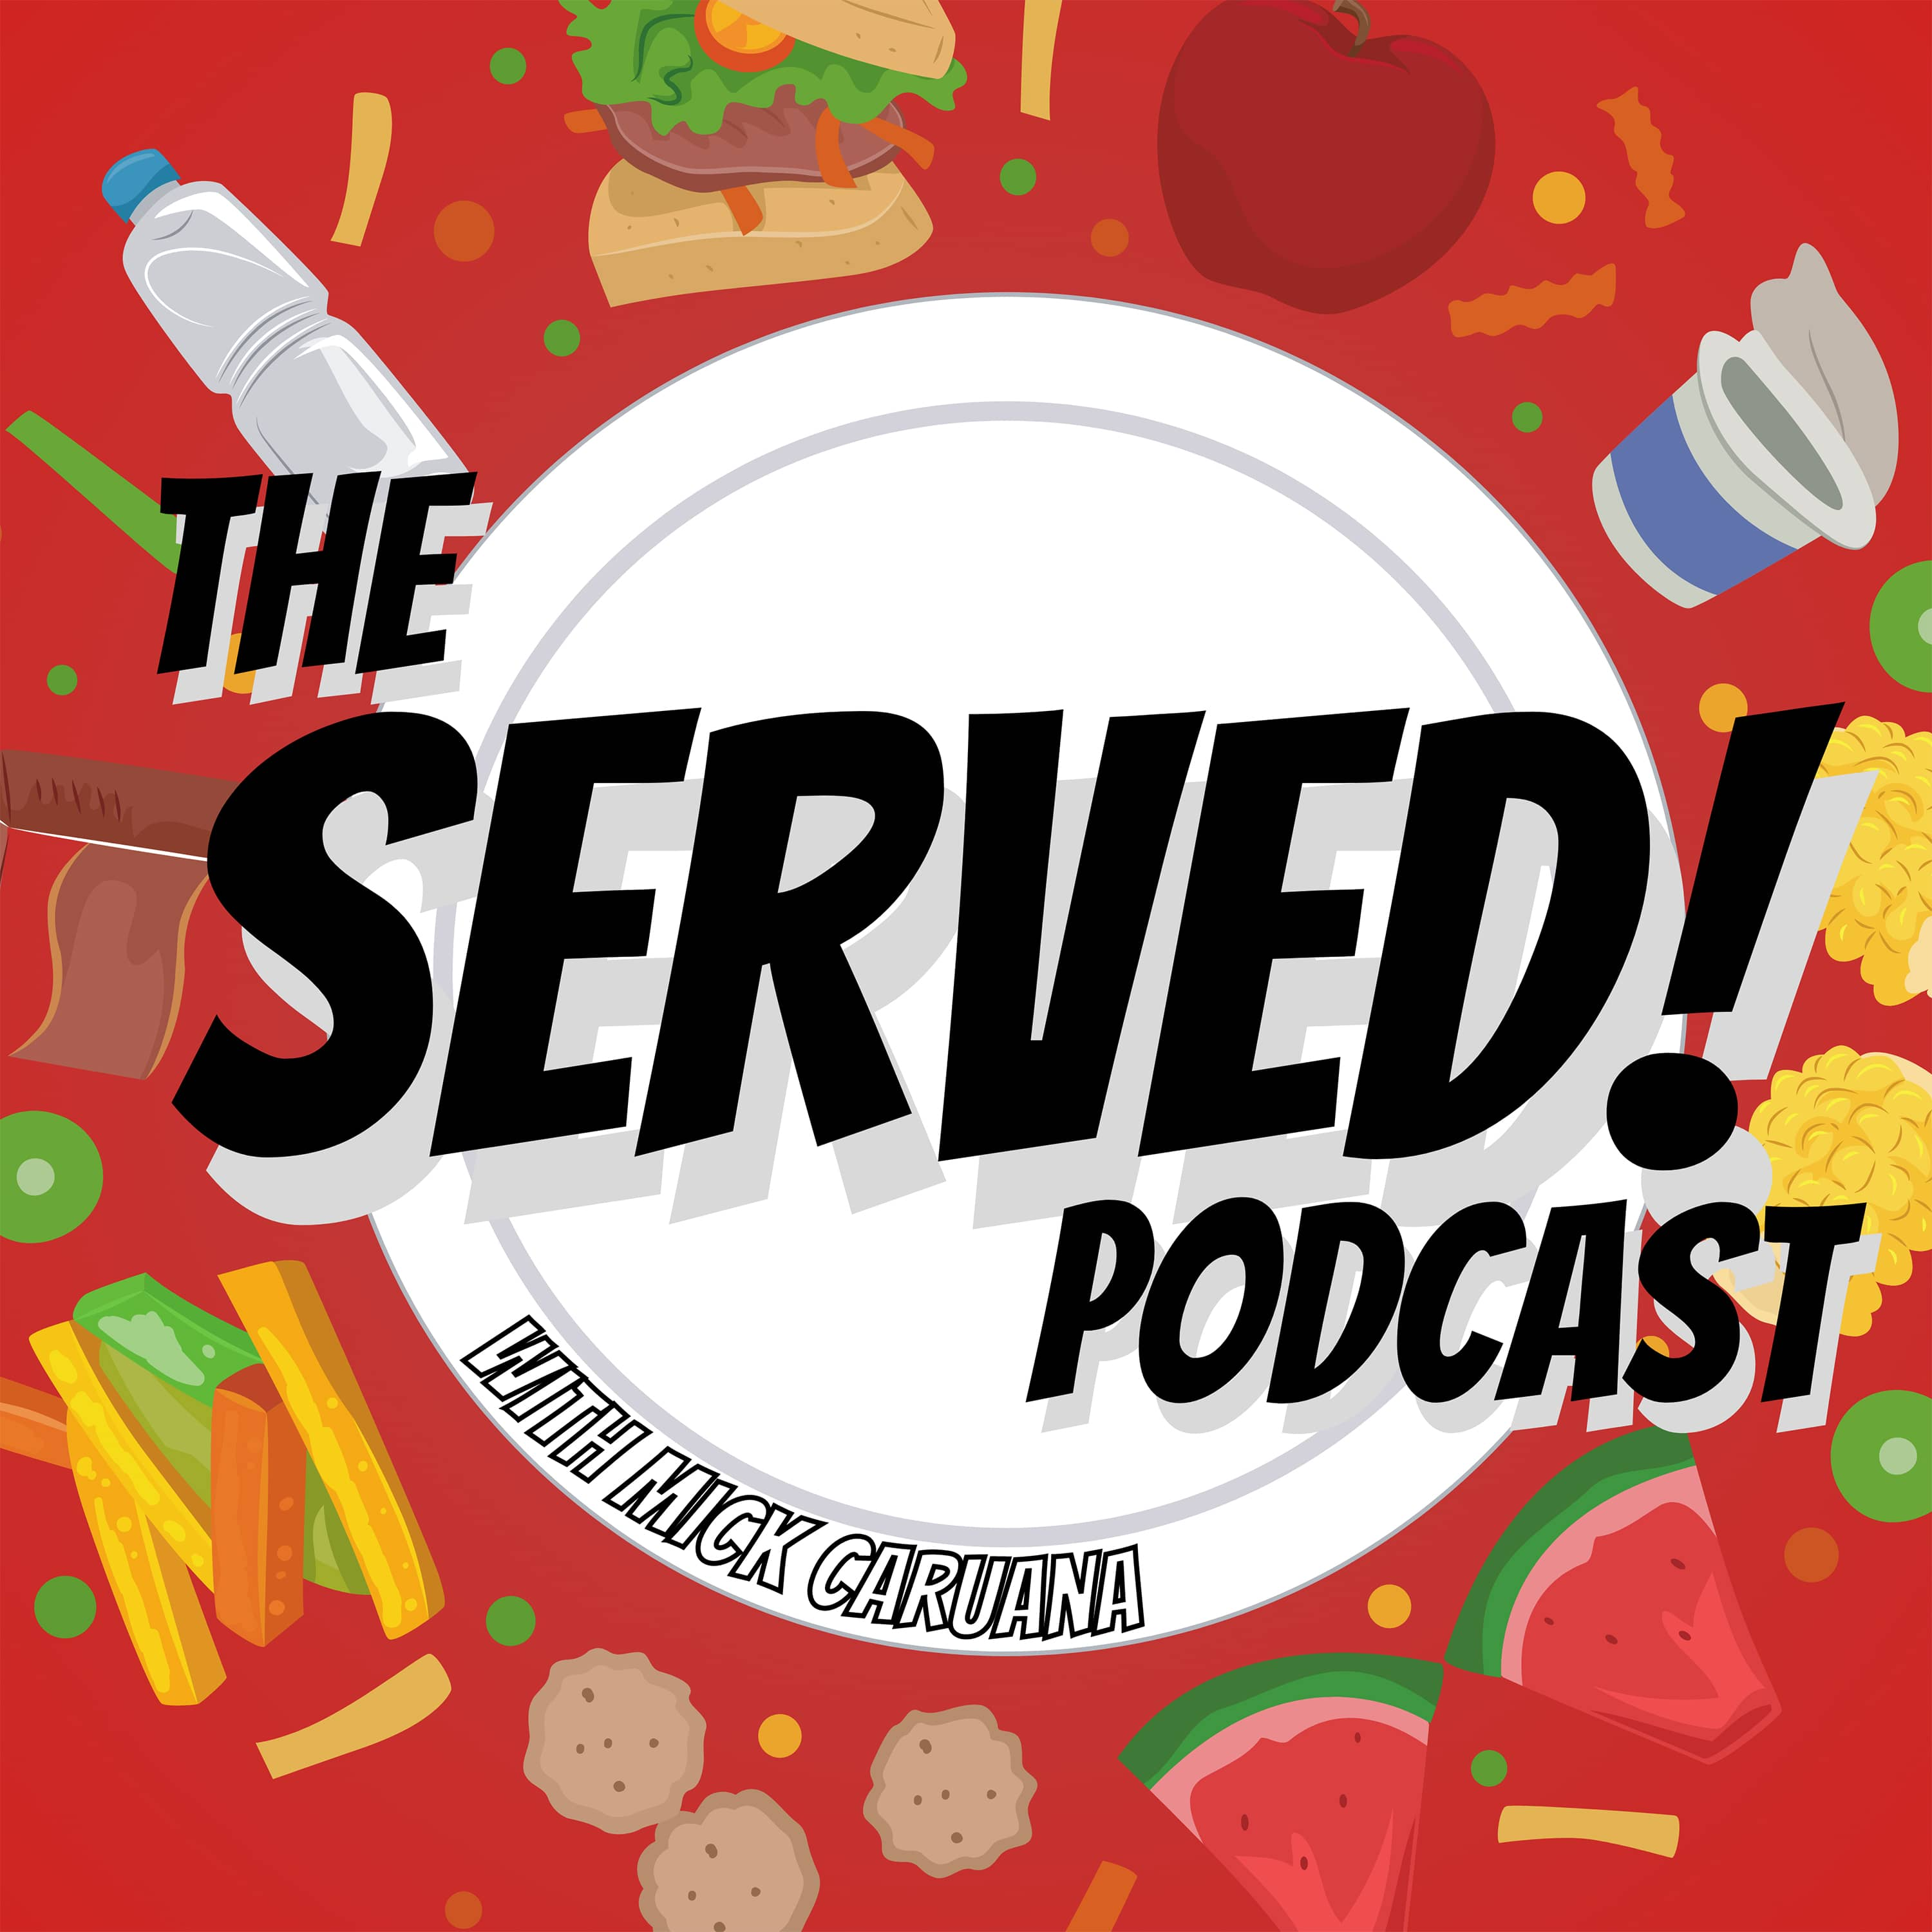 Ep. 32: A Burger for a Good Cause? Count Us In!